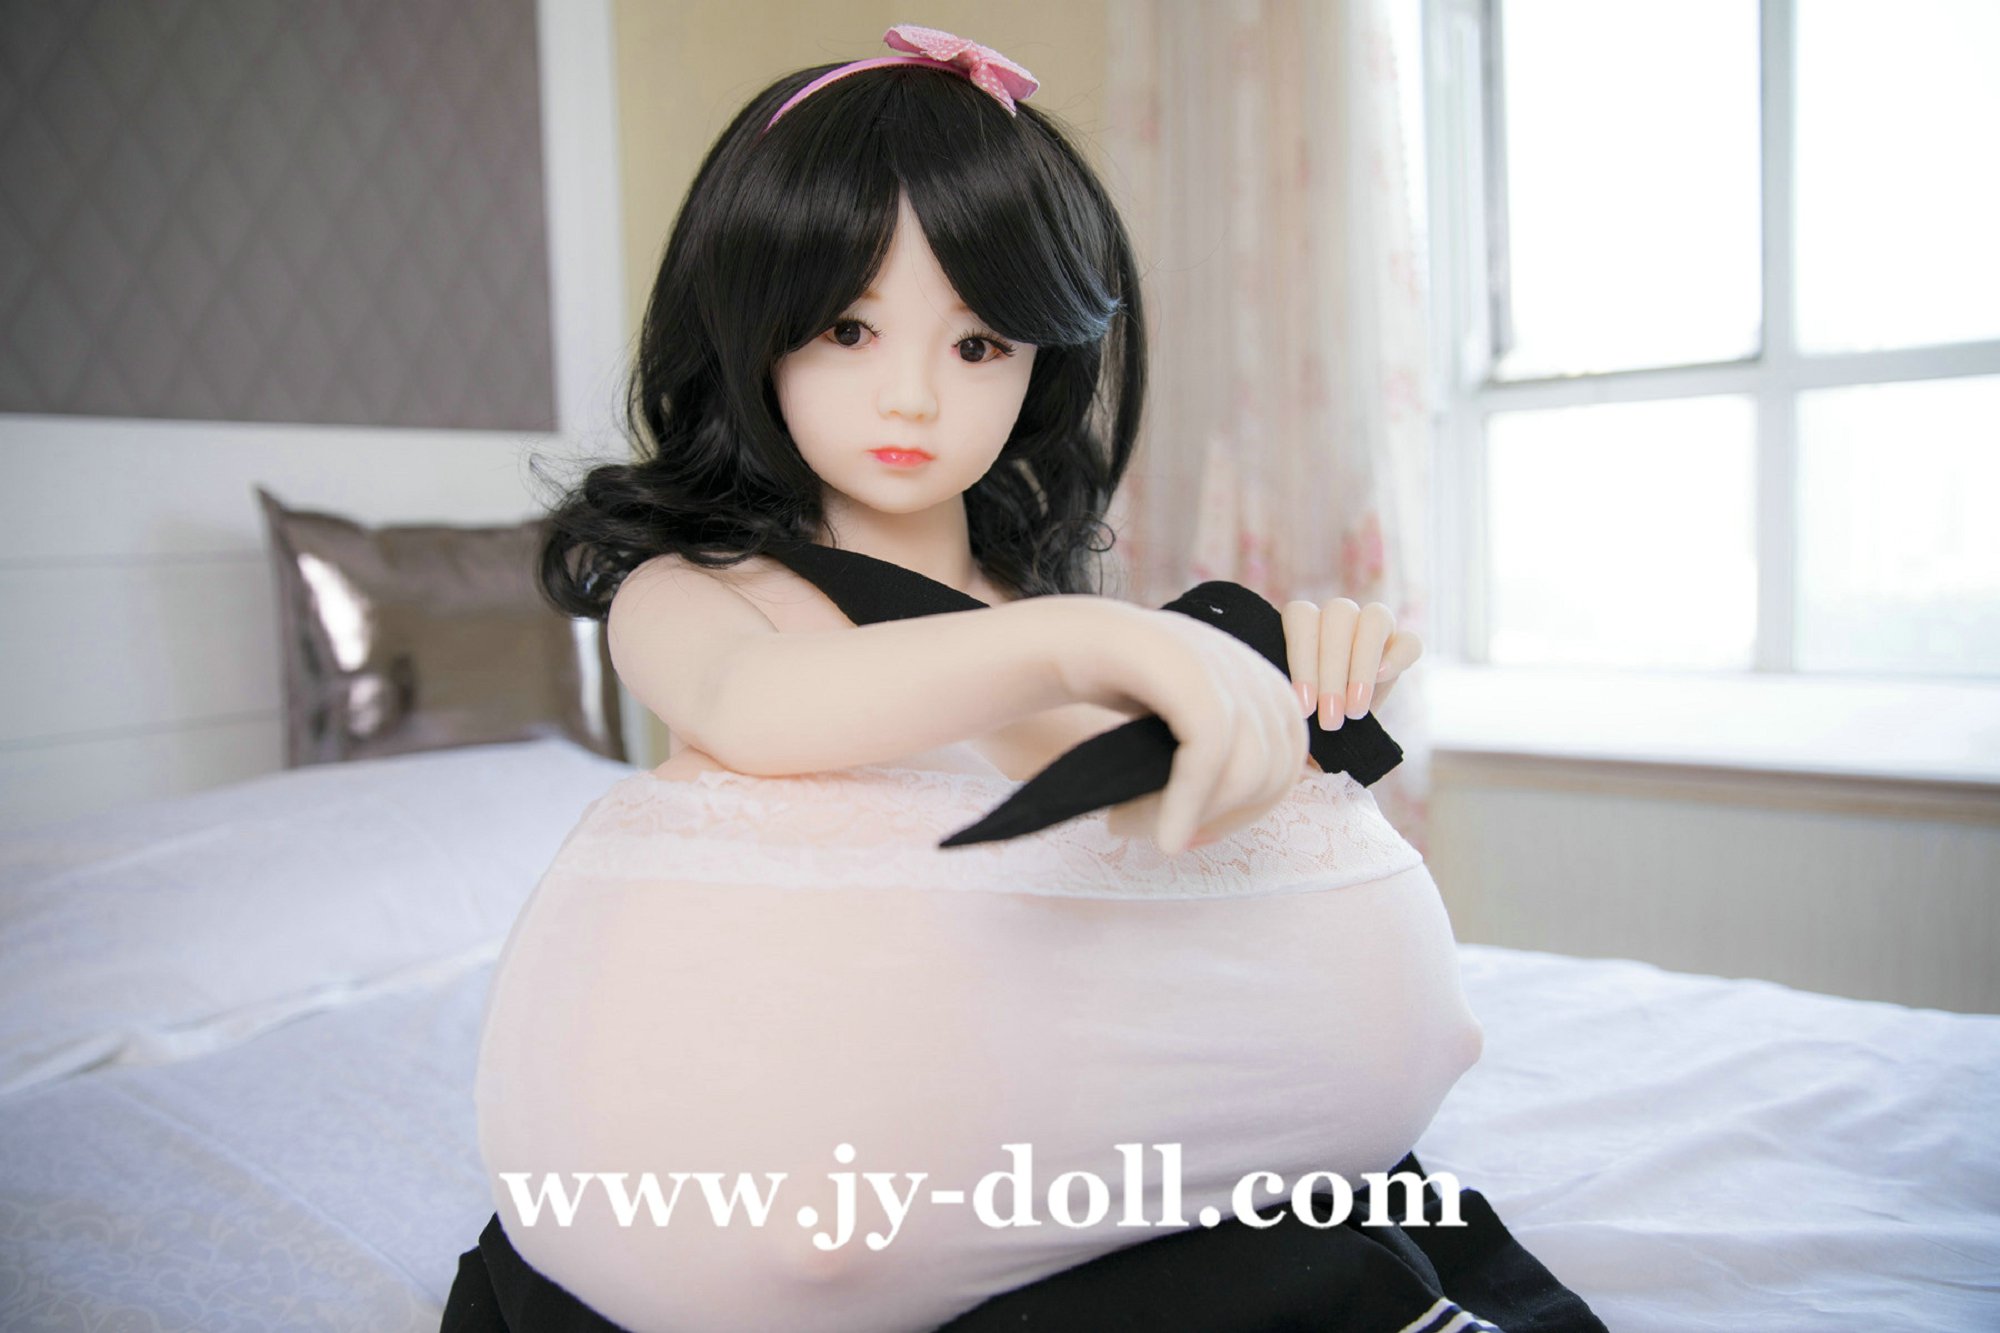 JY Doll 100CM huge Breasts Molly